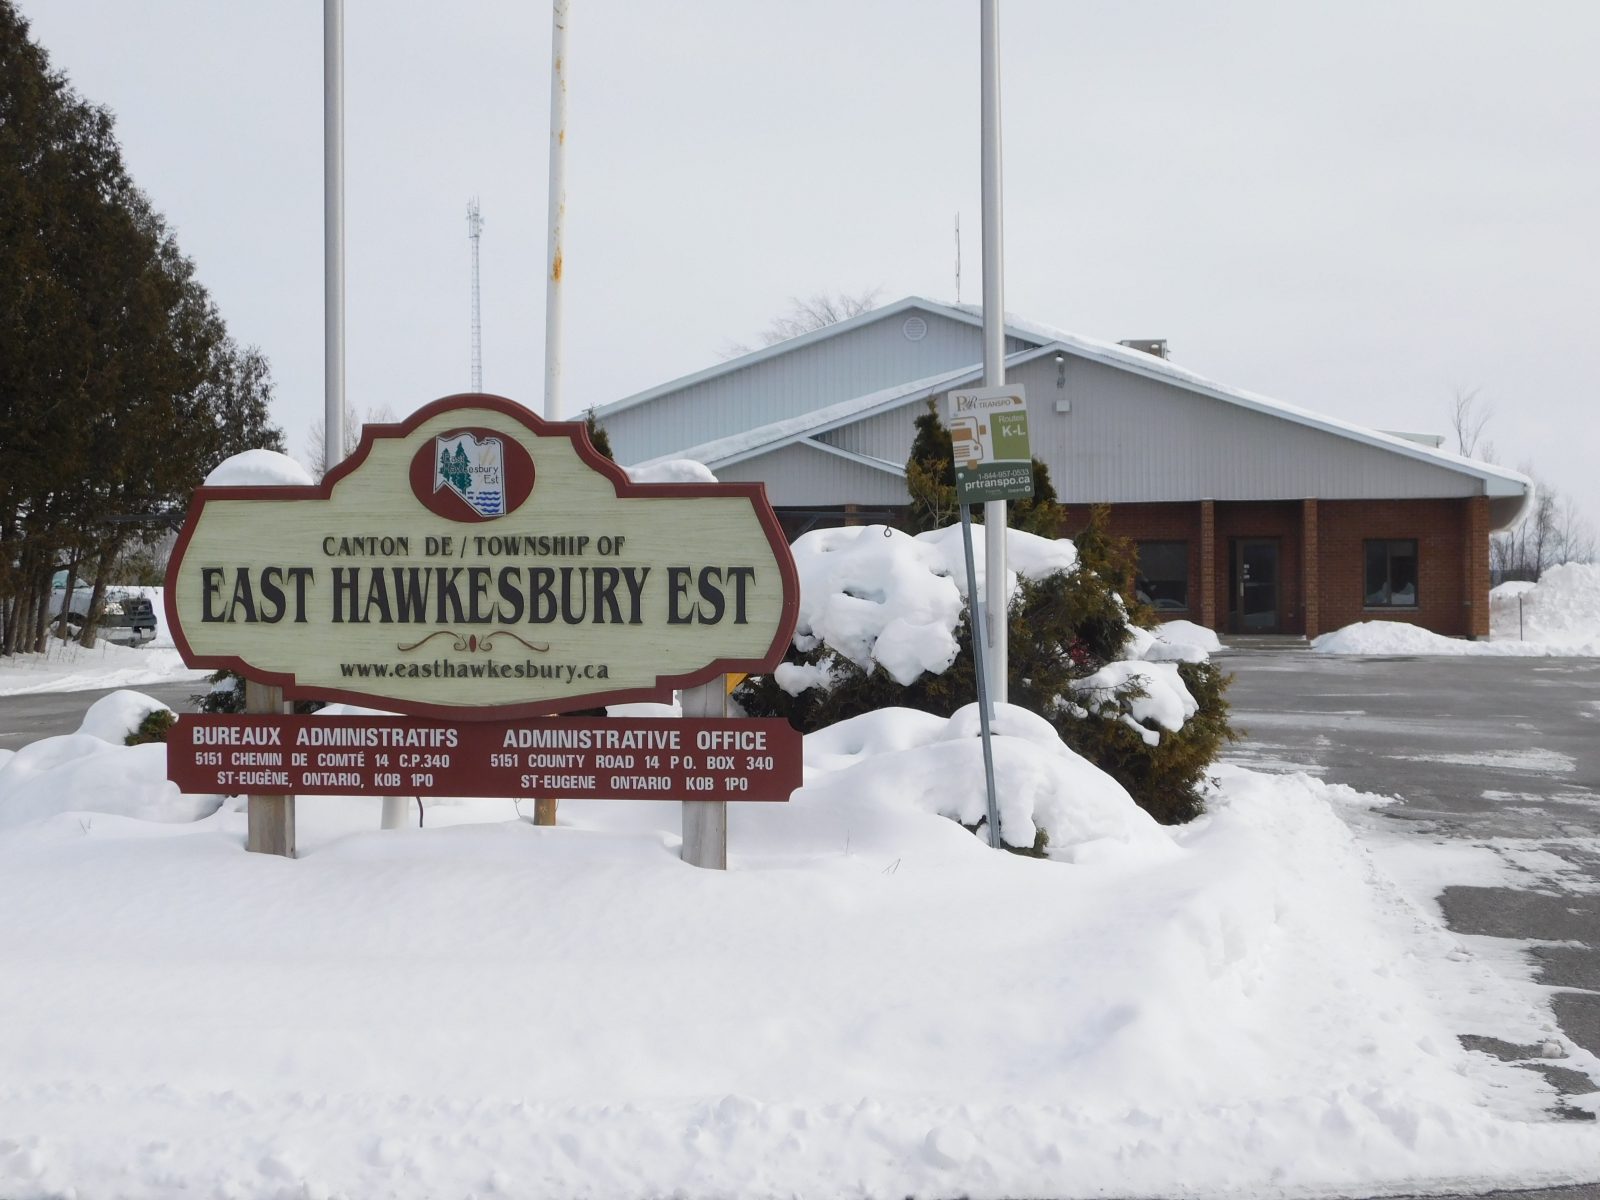 Budget 2022 approved for East Hawkesbury